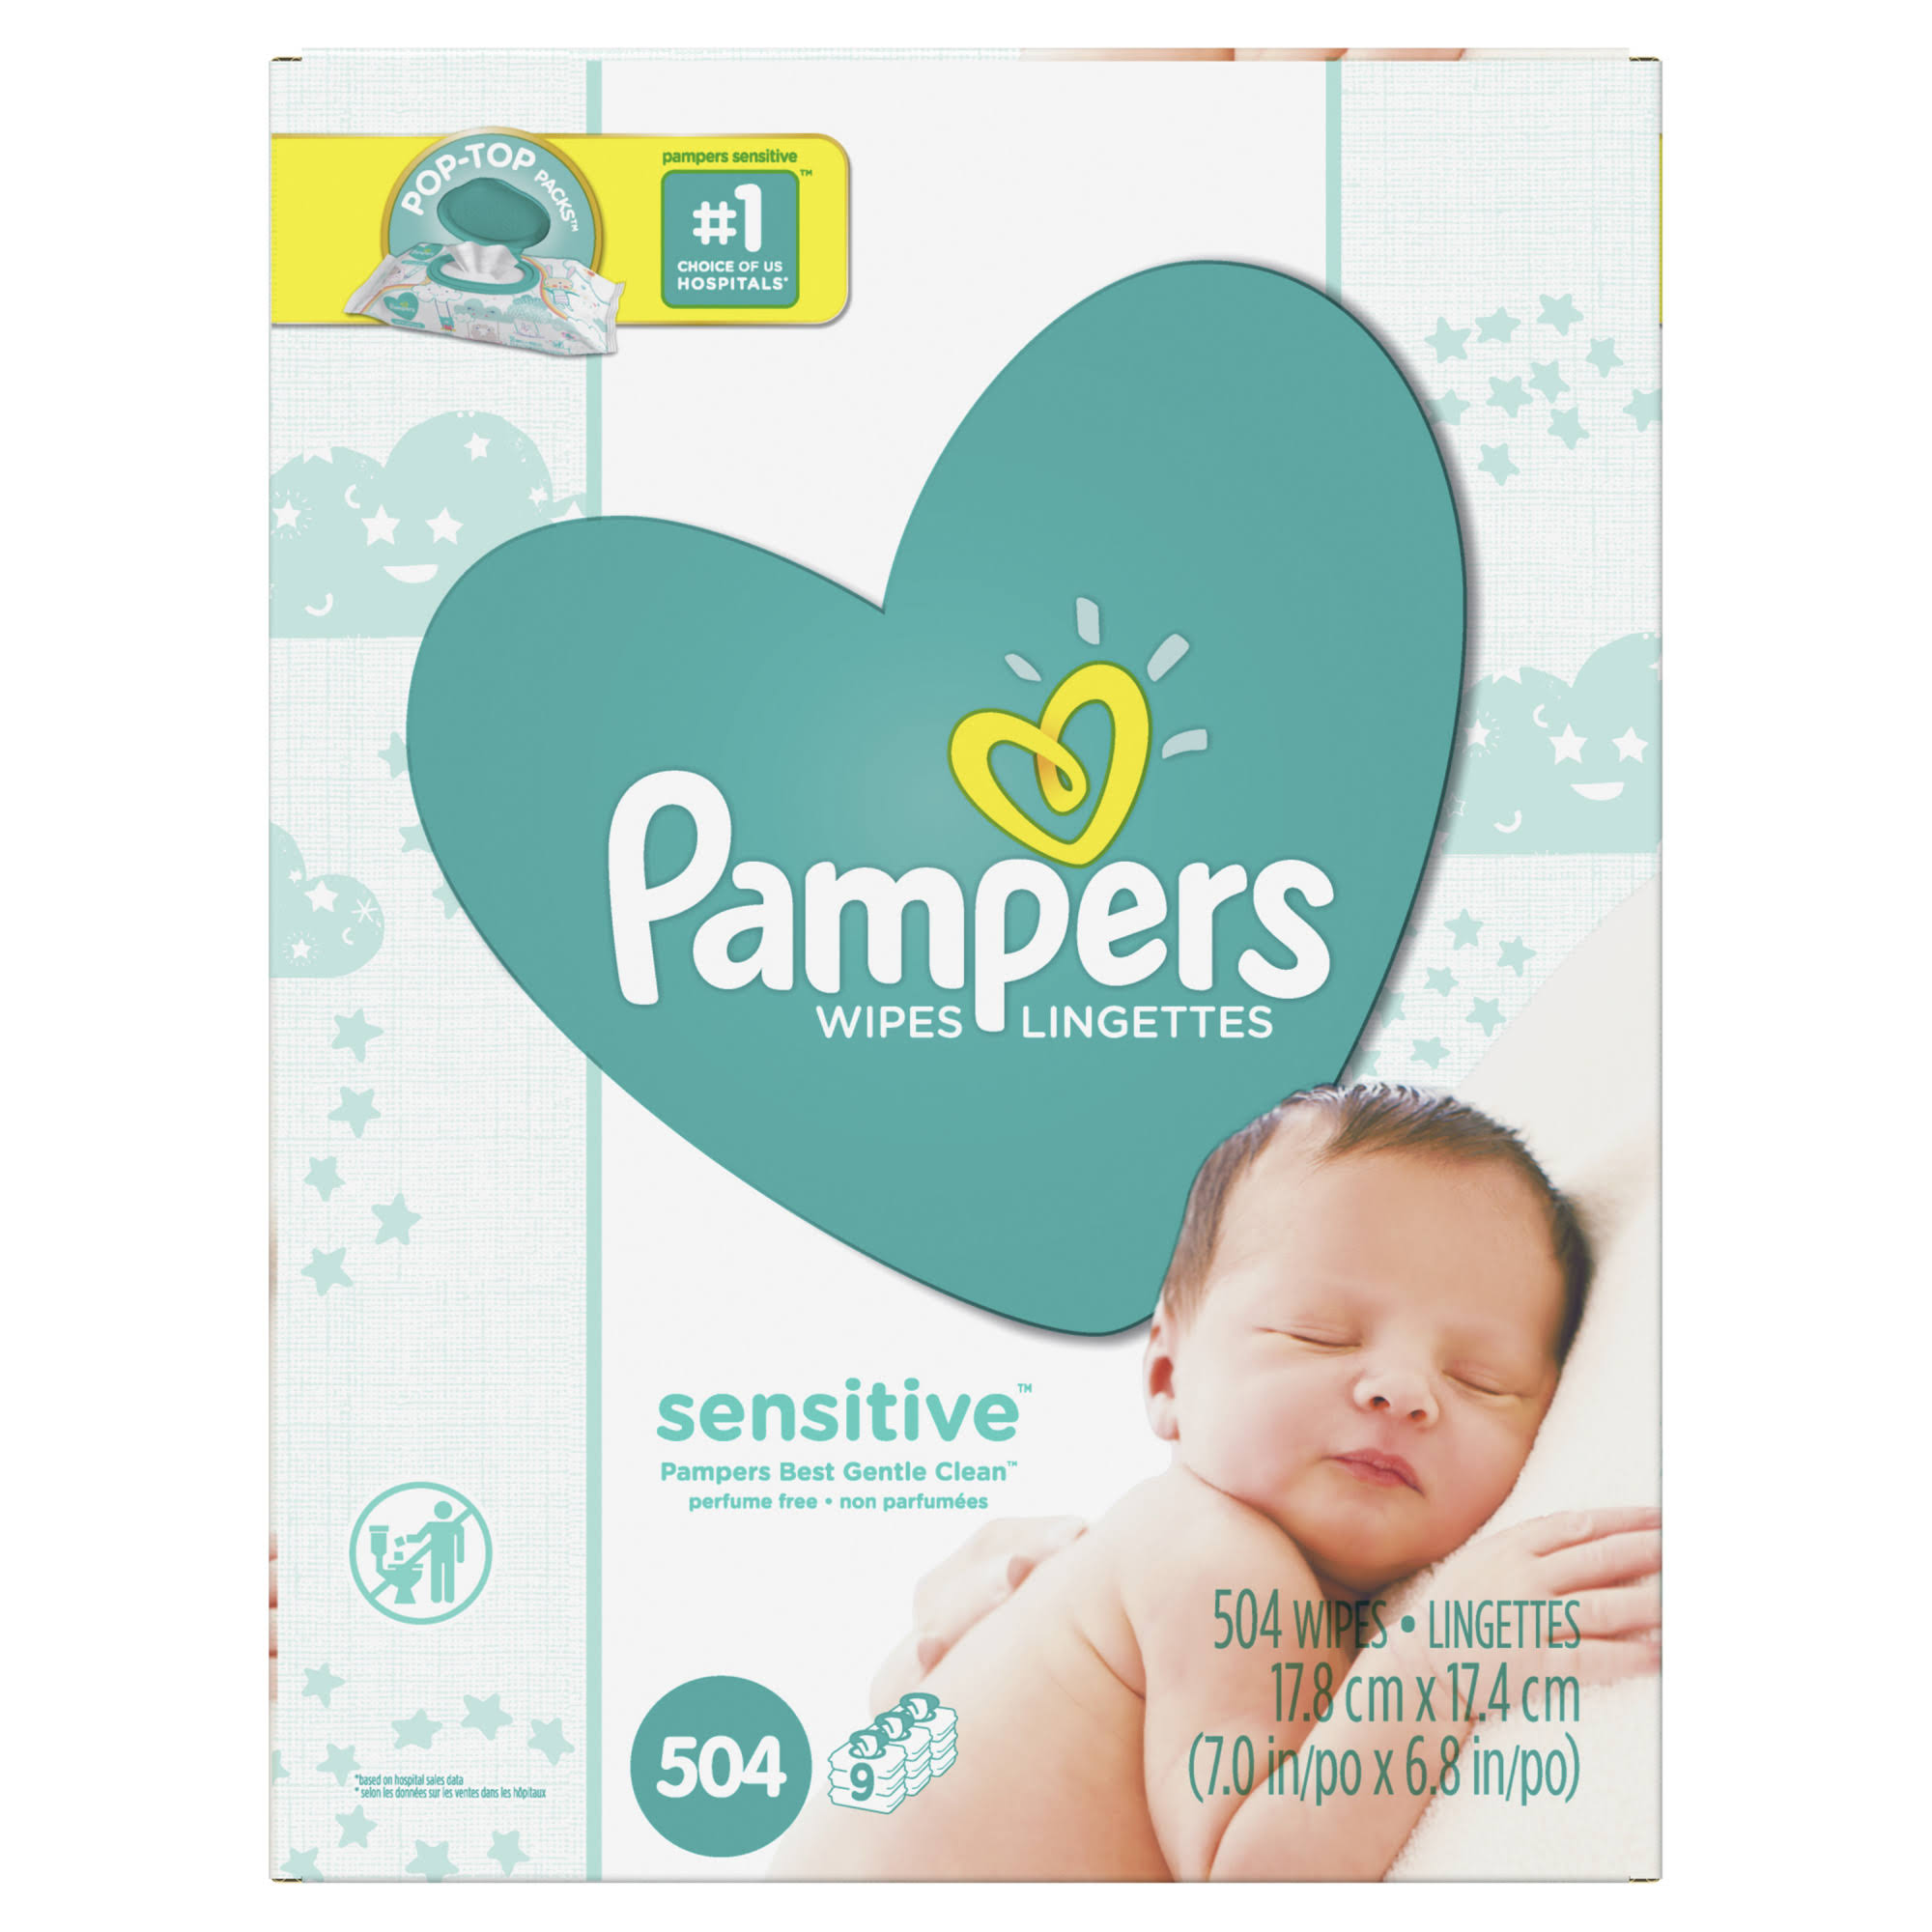 Pampers Baby Wipes - Sensitive, 504ct, 9pk